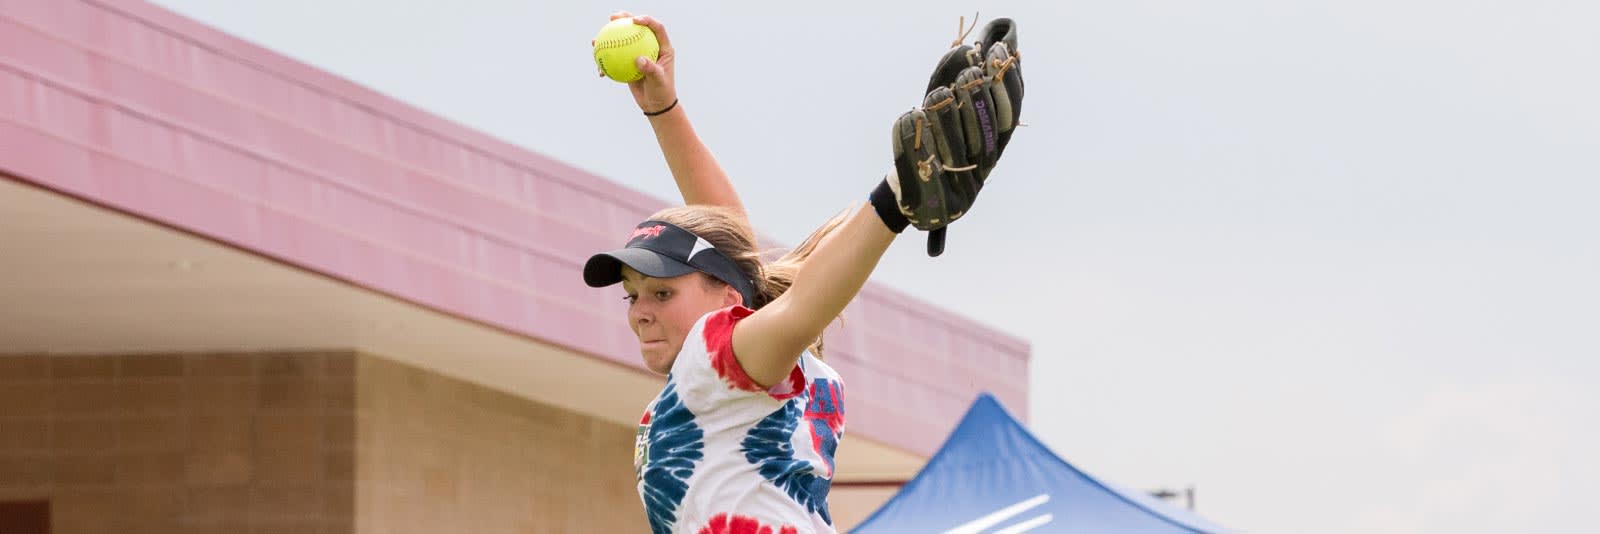 How to find the right college softball team for you